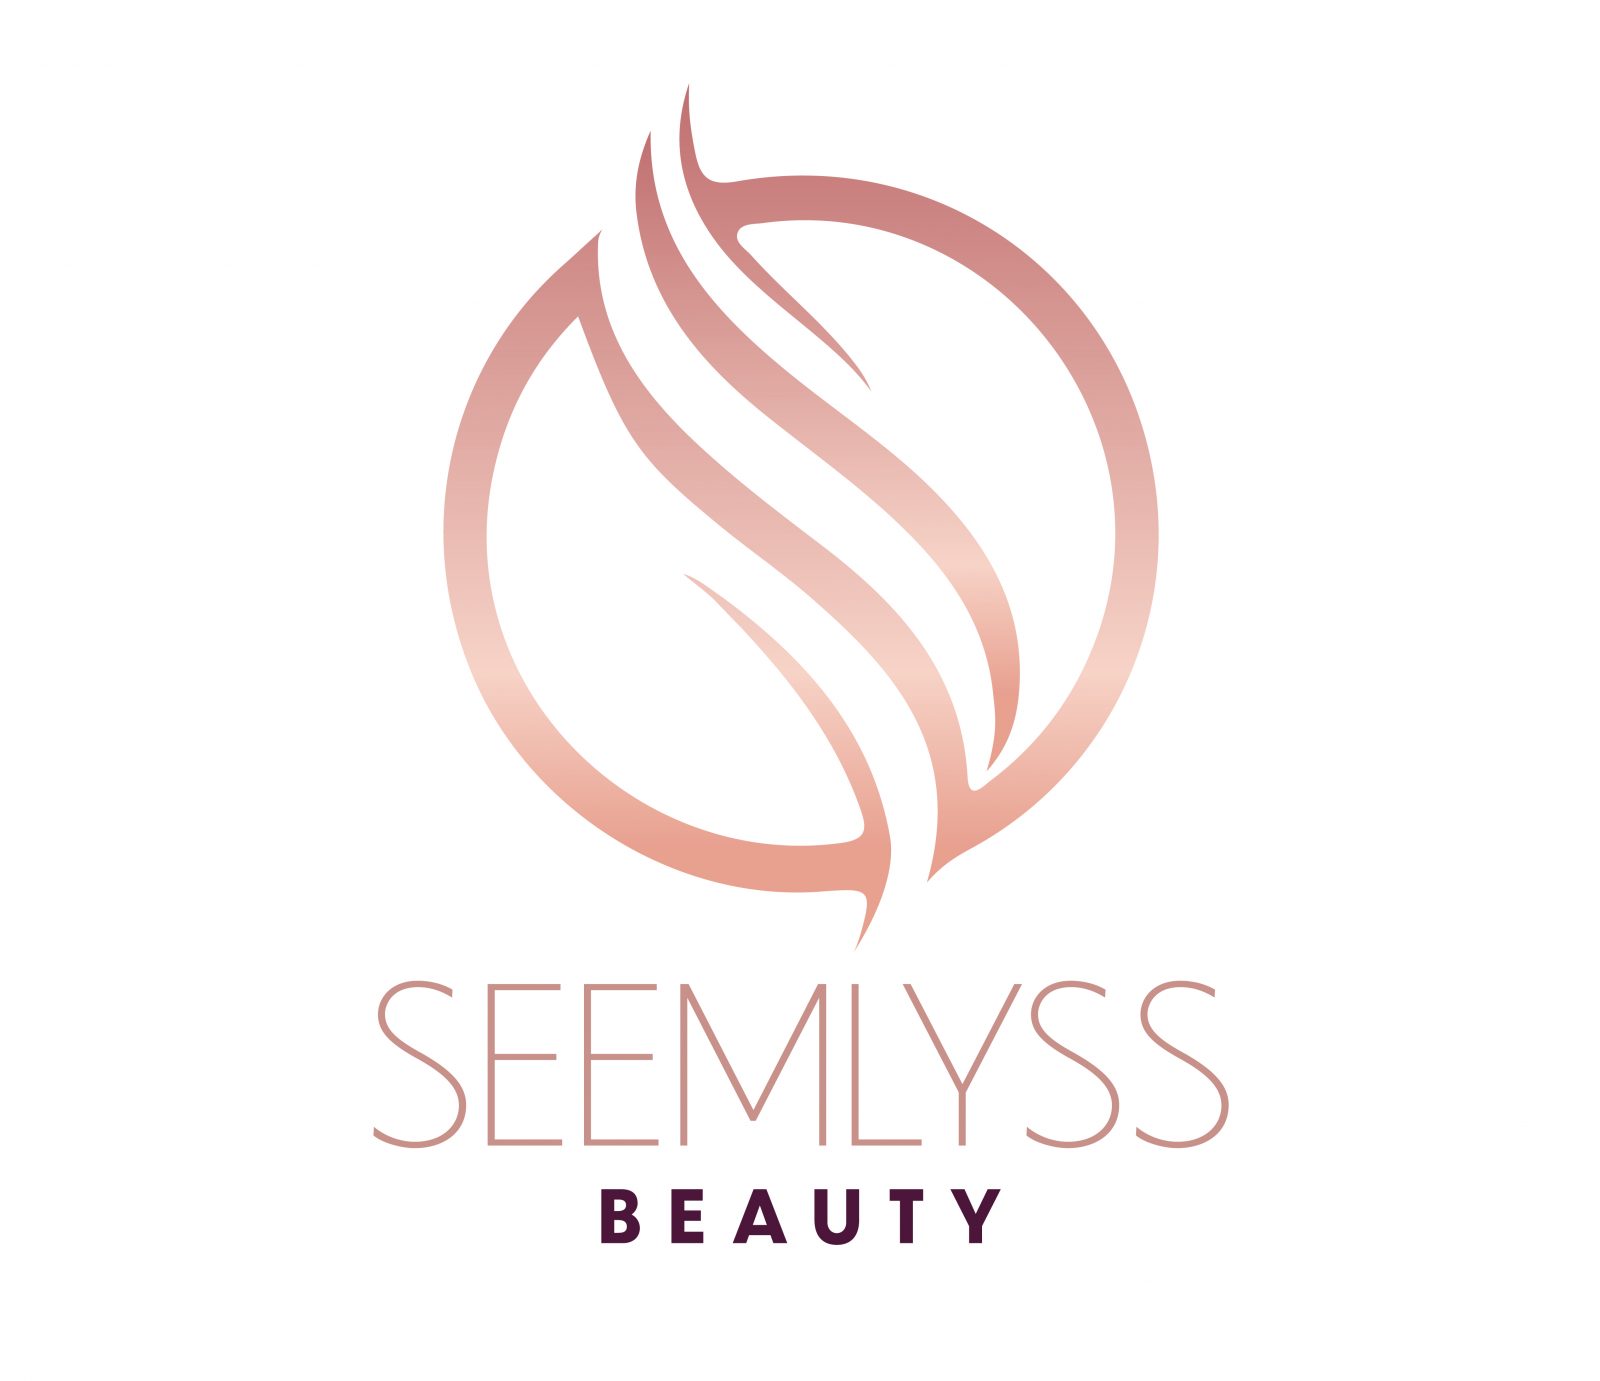 Featured image for “Seemleyss Beauty”